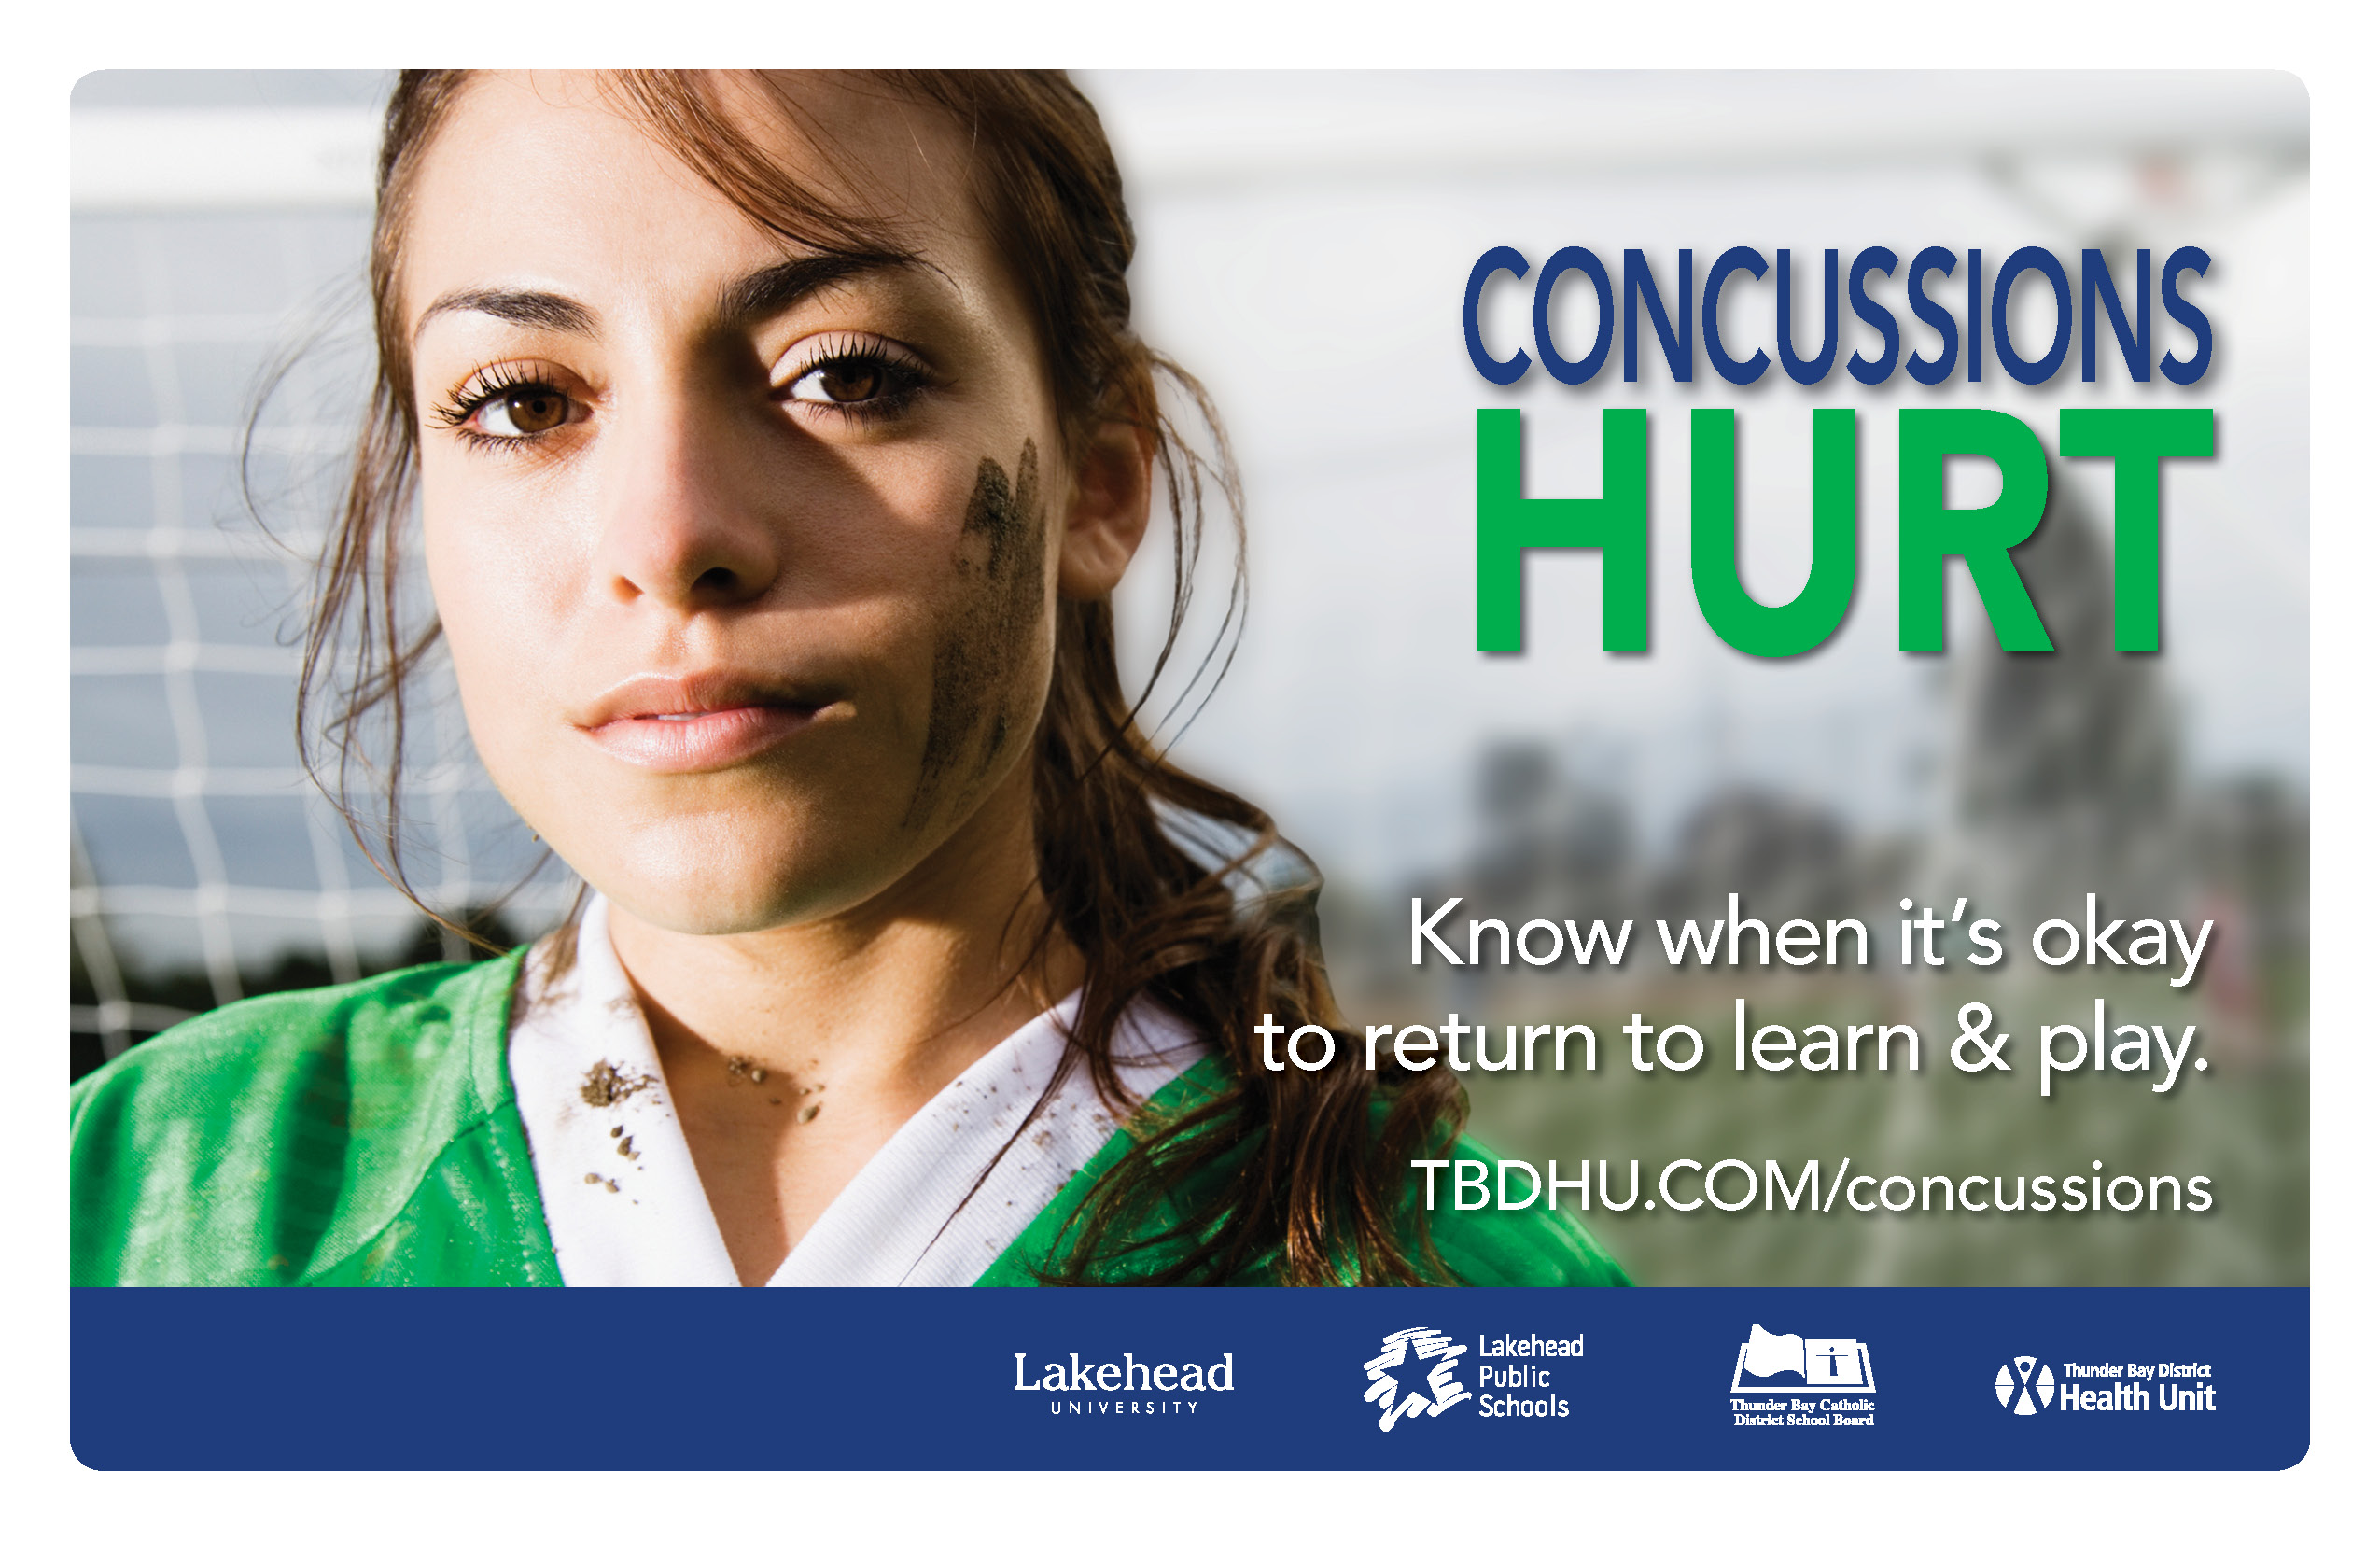 Concussions Hurt - teenage female soccer player